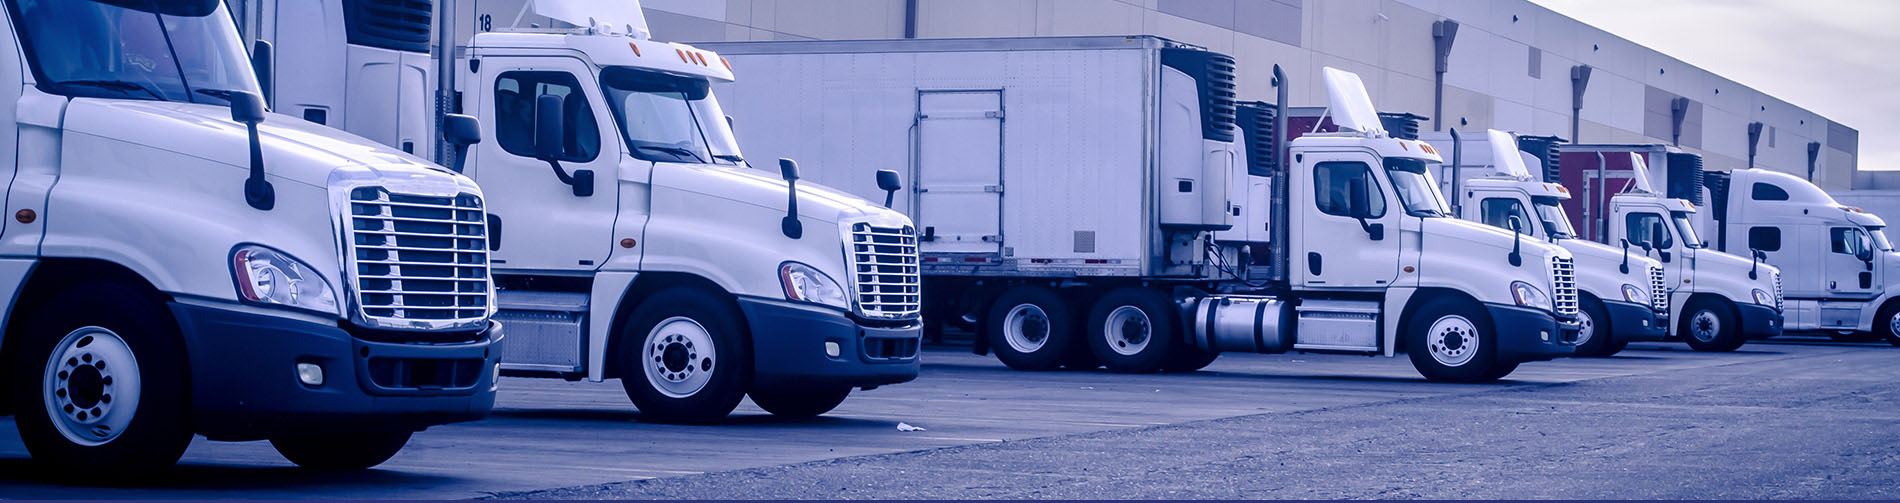 services-warehouse-distribution-trucks-delivery-deliver-shipping-diversified-labeling-solutions